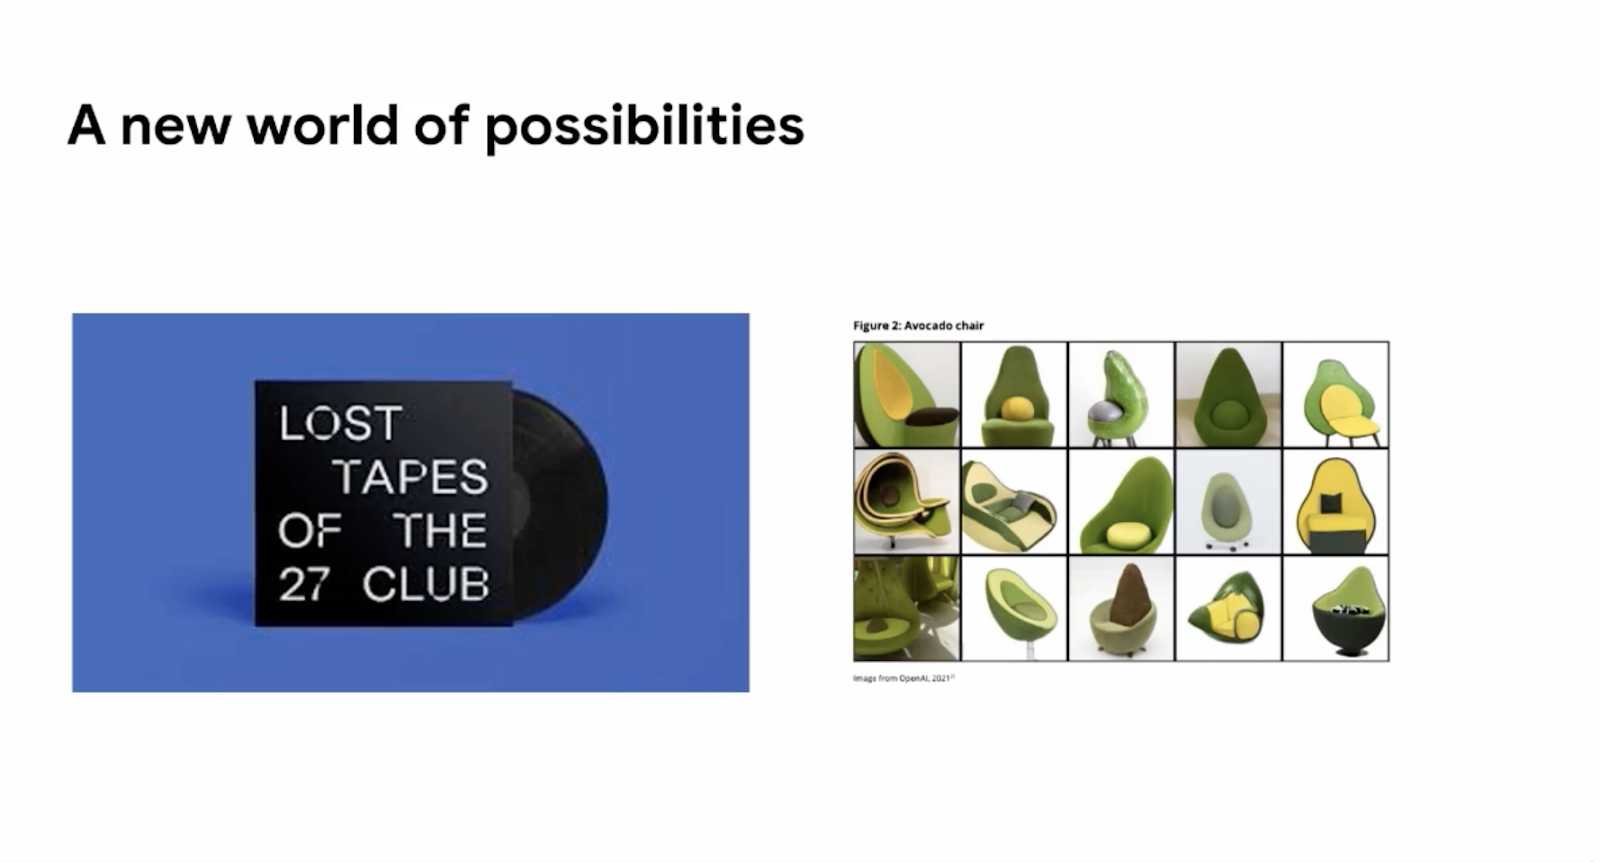 A title that says "a new world of possibilities" then an image of the lost tapes of the 27 club, and then a grid with 15 images of avocado chairs. 